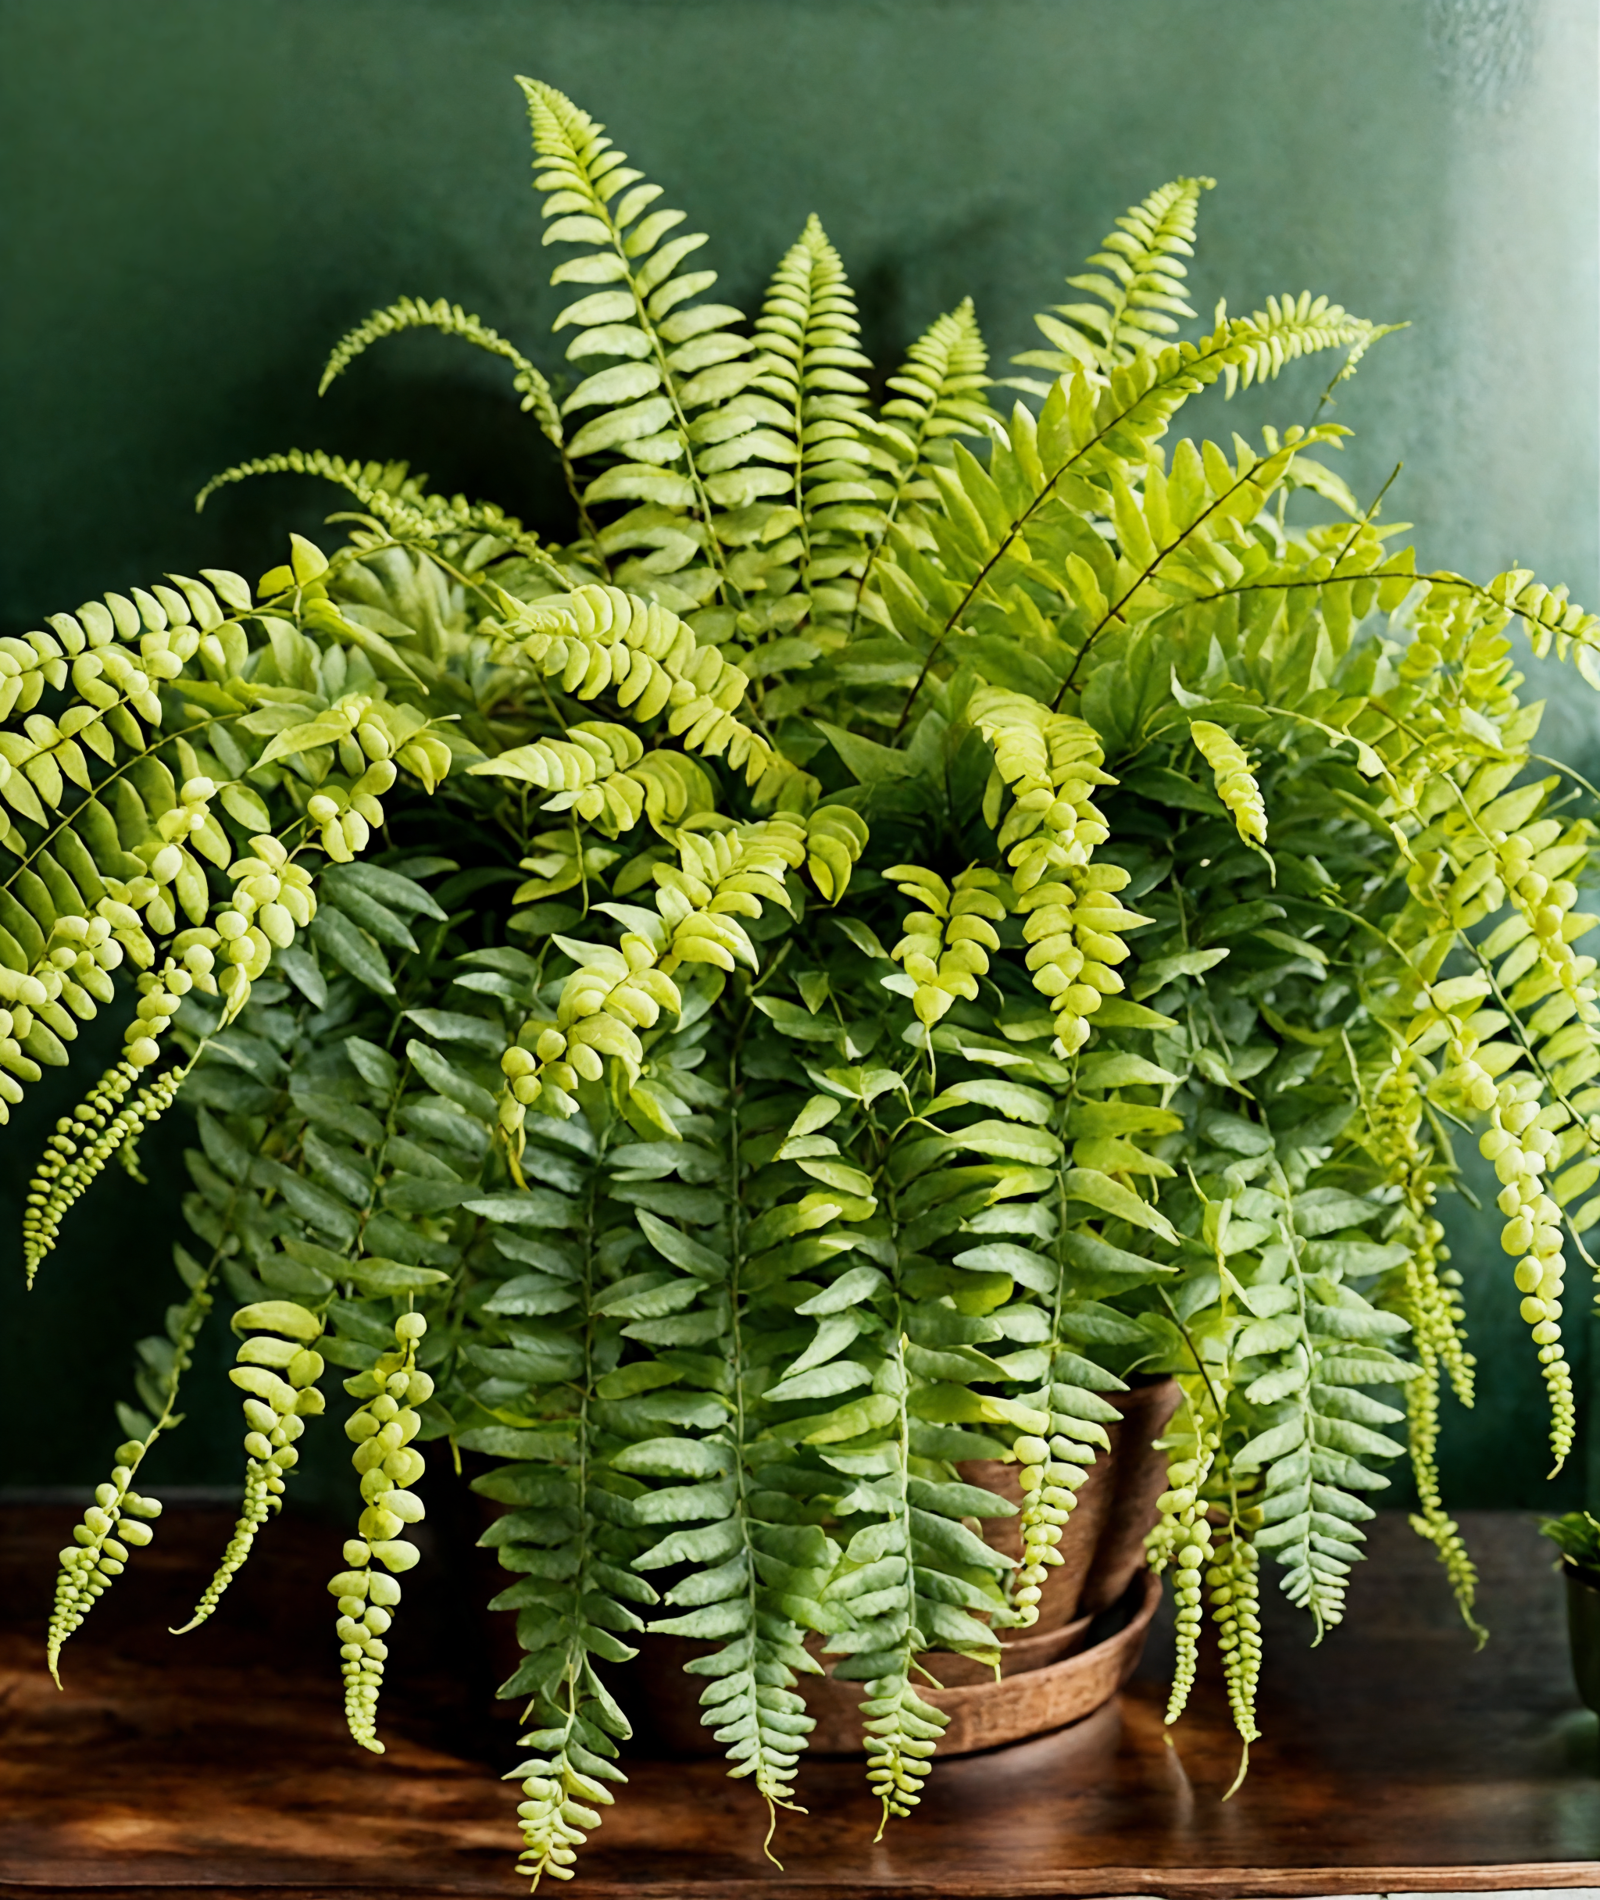 Potted Nephrolepis exaltata (Boston fern) on a wooden table with green bananas, in a well-lit rustic room.